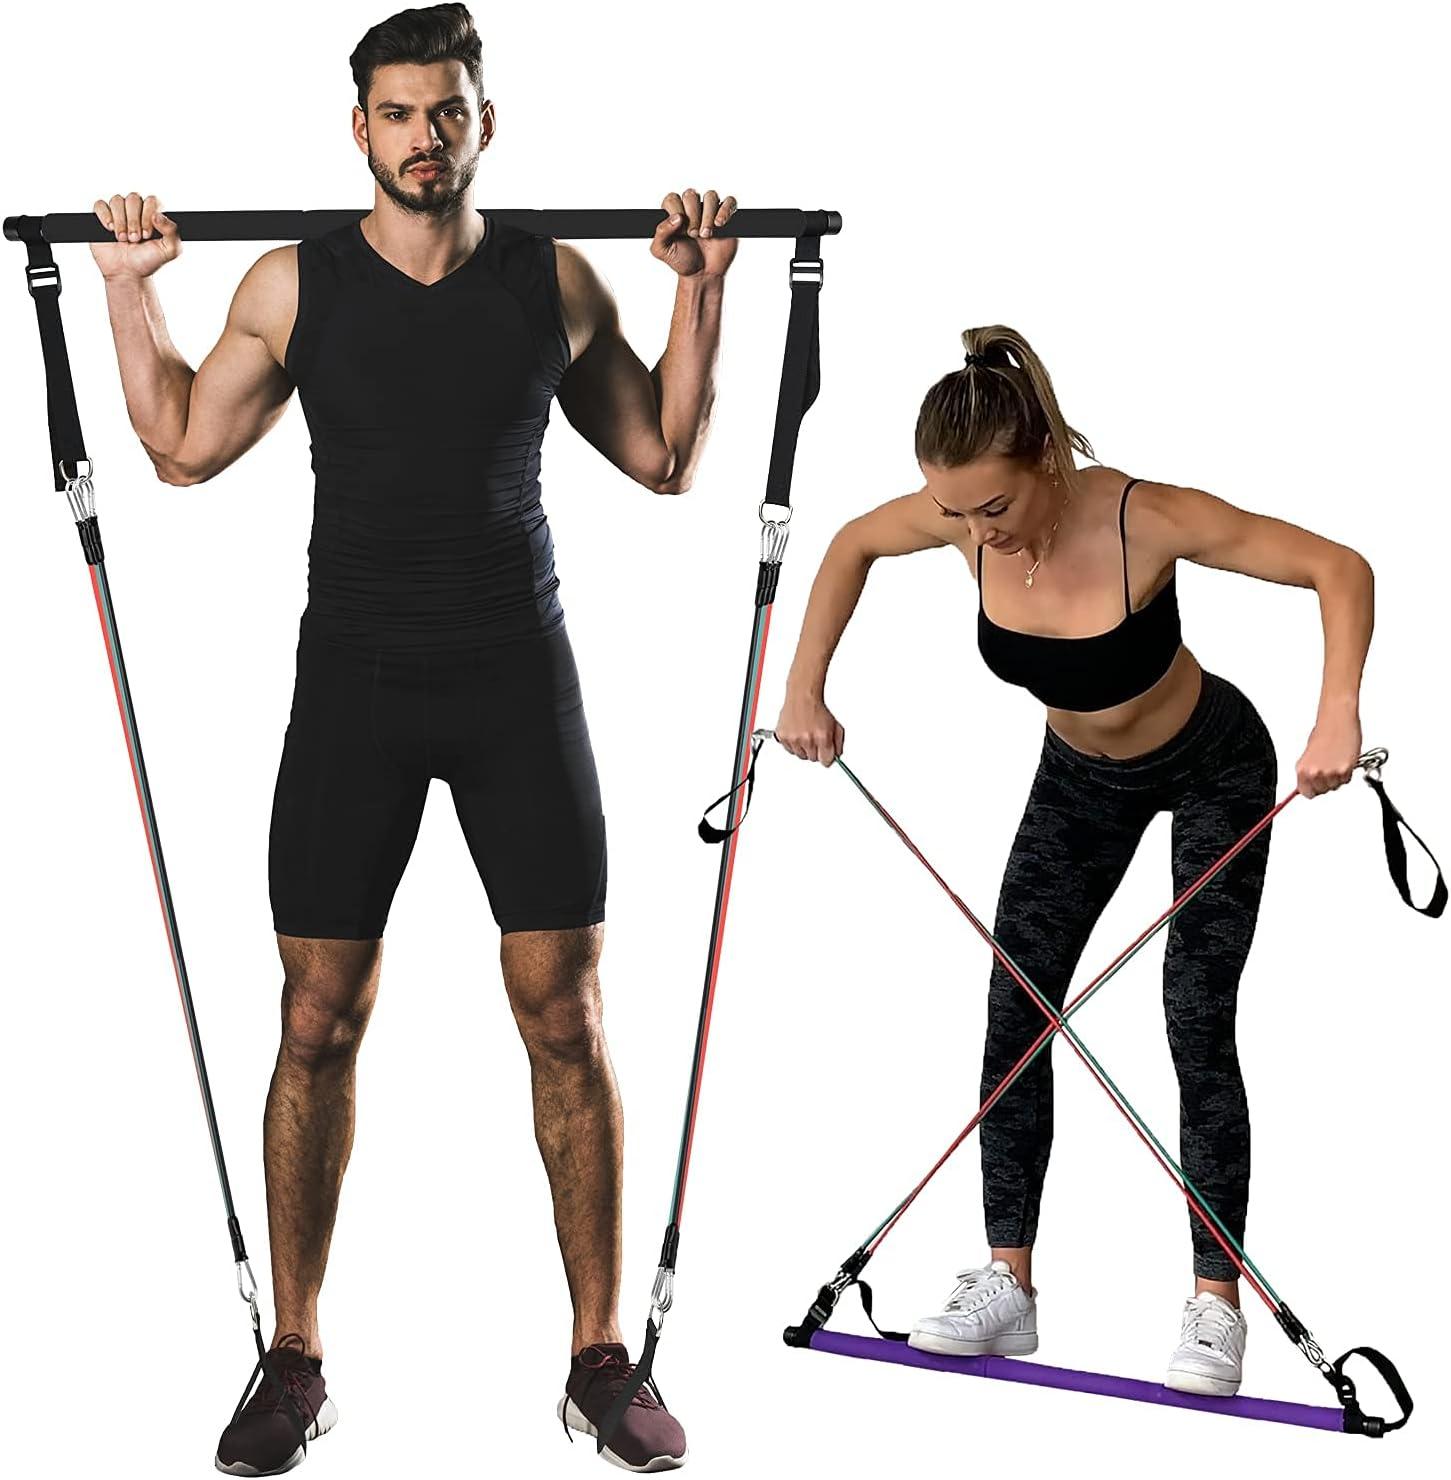 Goocrun Portable Pilates Bar Kit with Resistance Bands for Men and